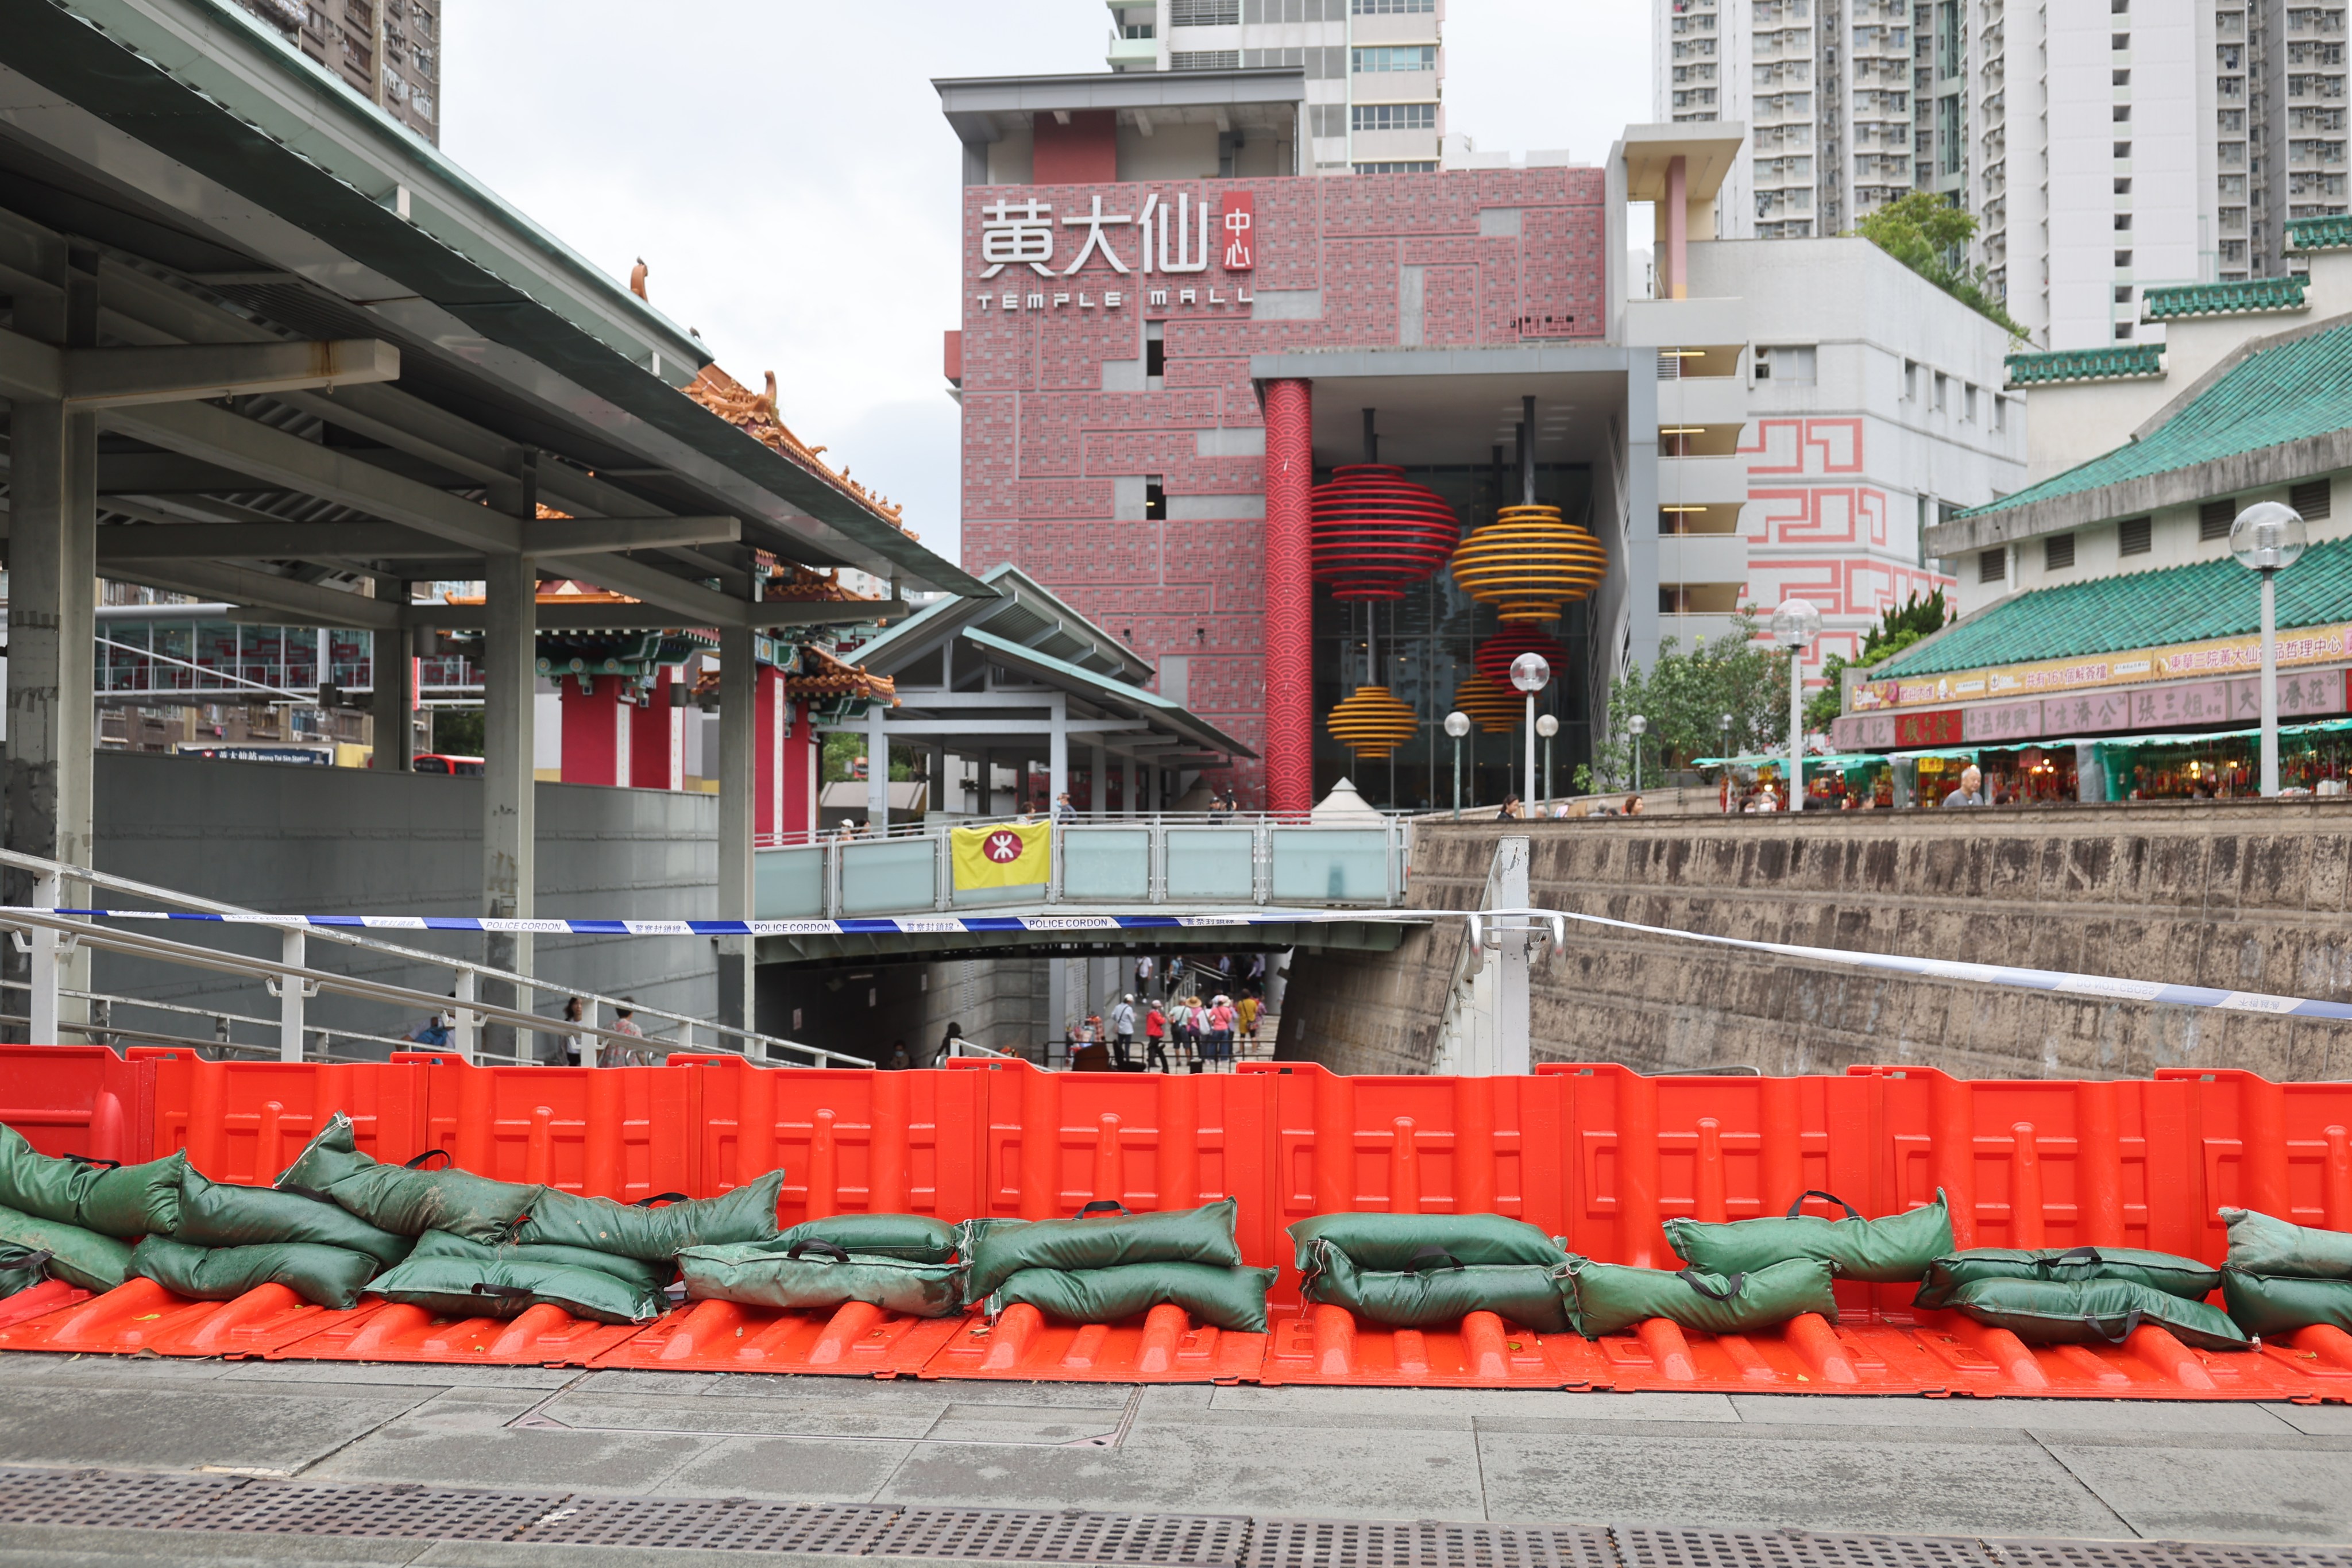 Sandbags have been set up outside Temple Mall in Wong Tai Sin. Photo: Edmond So